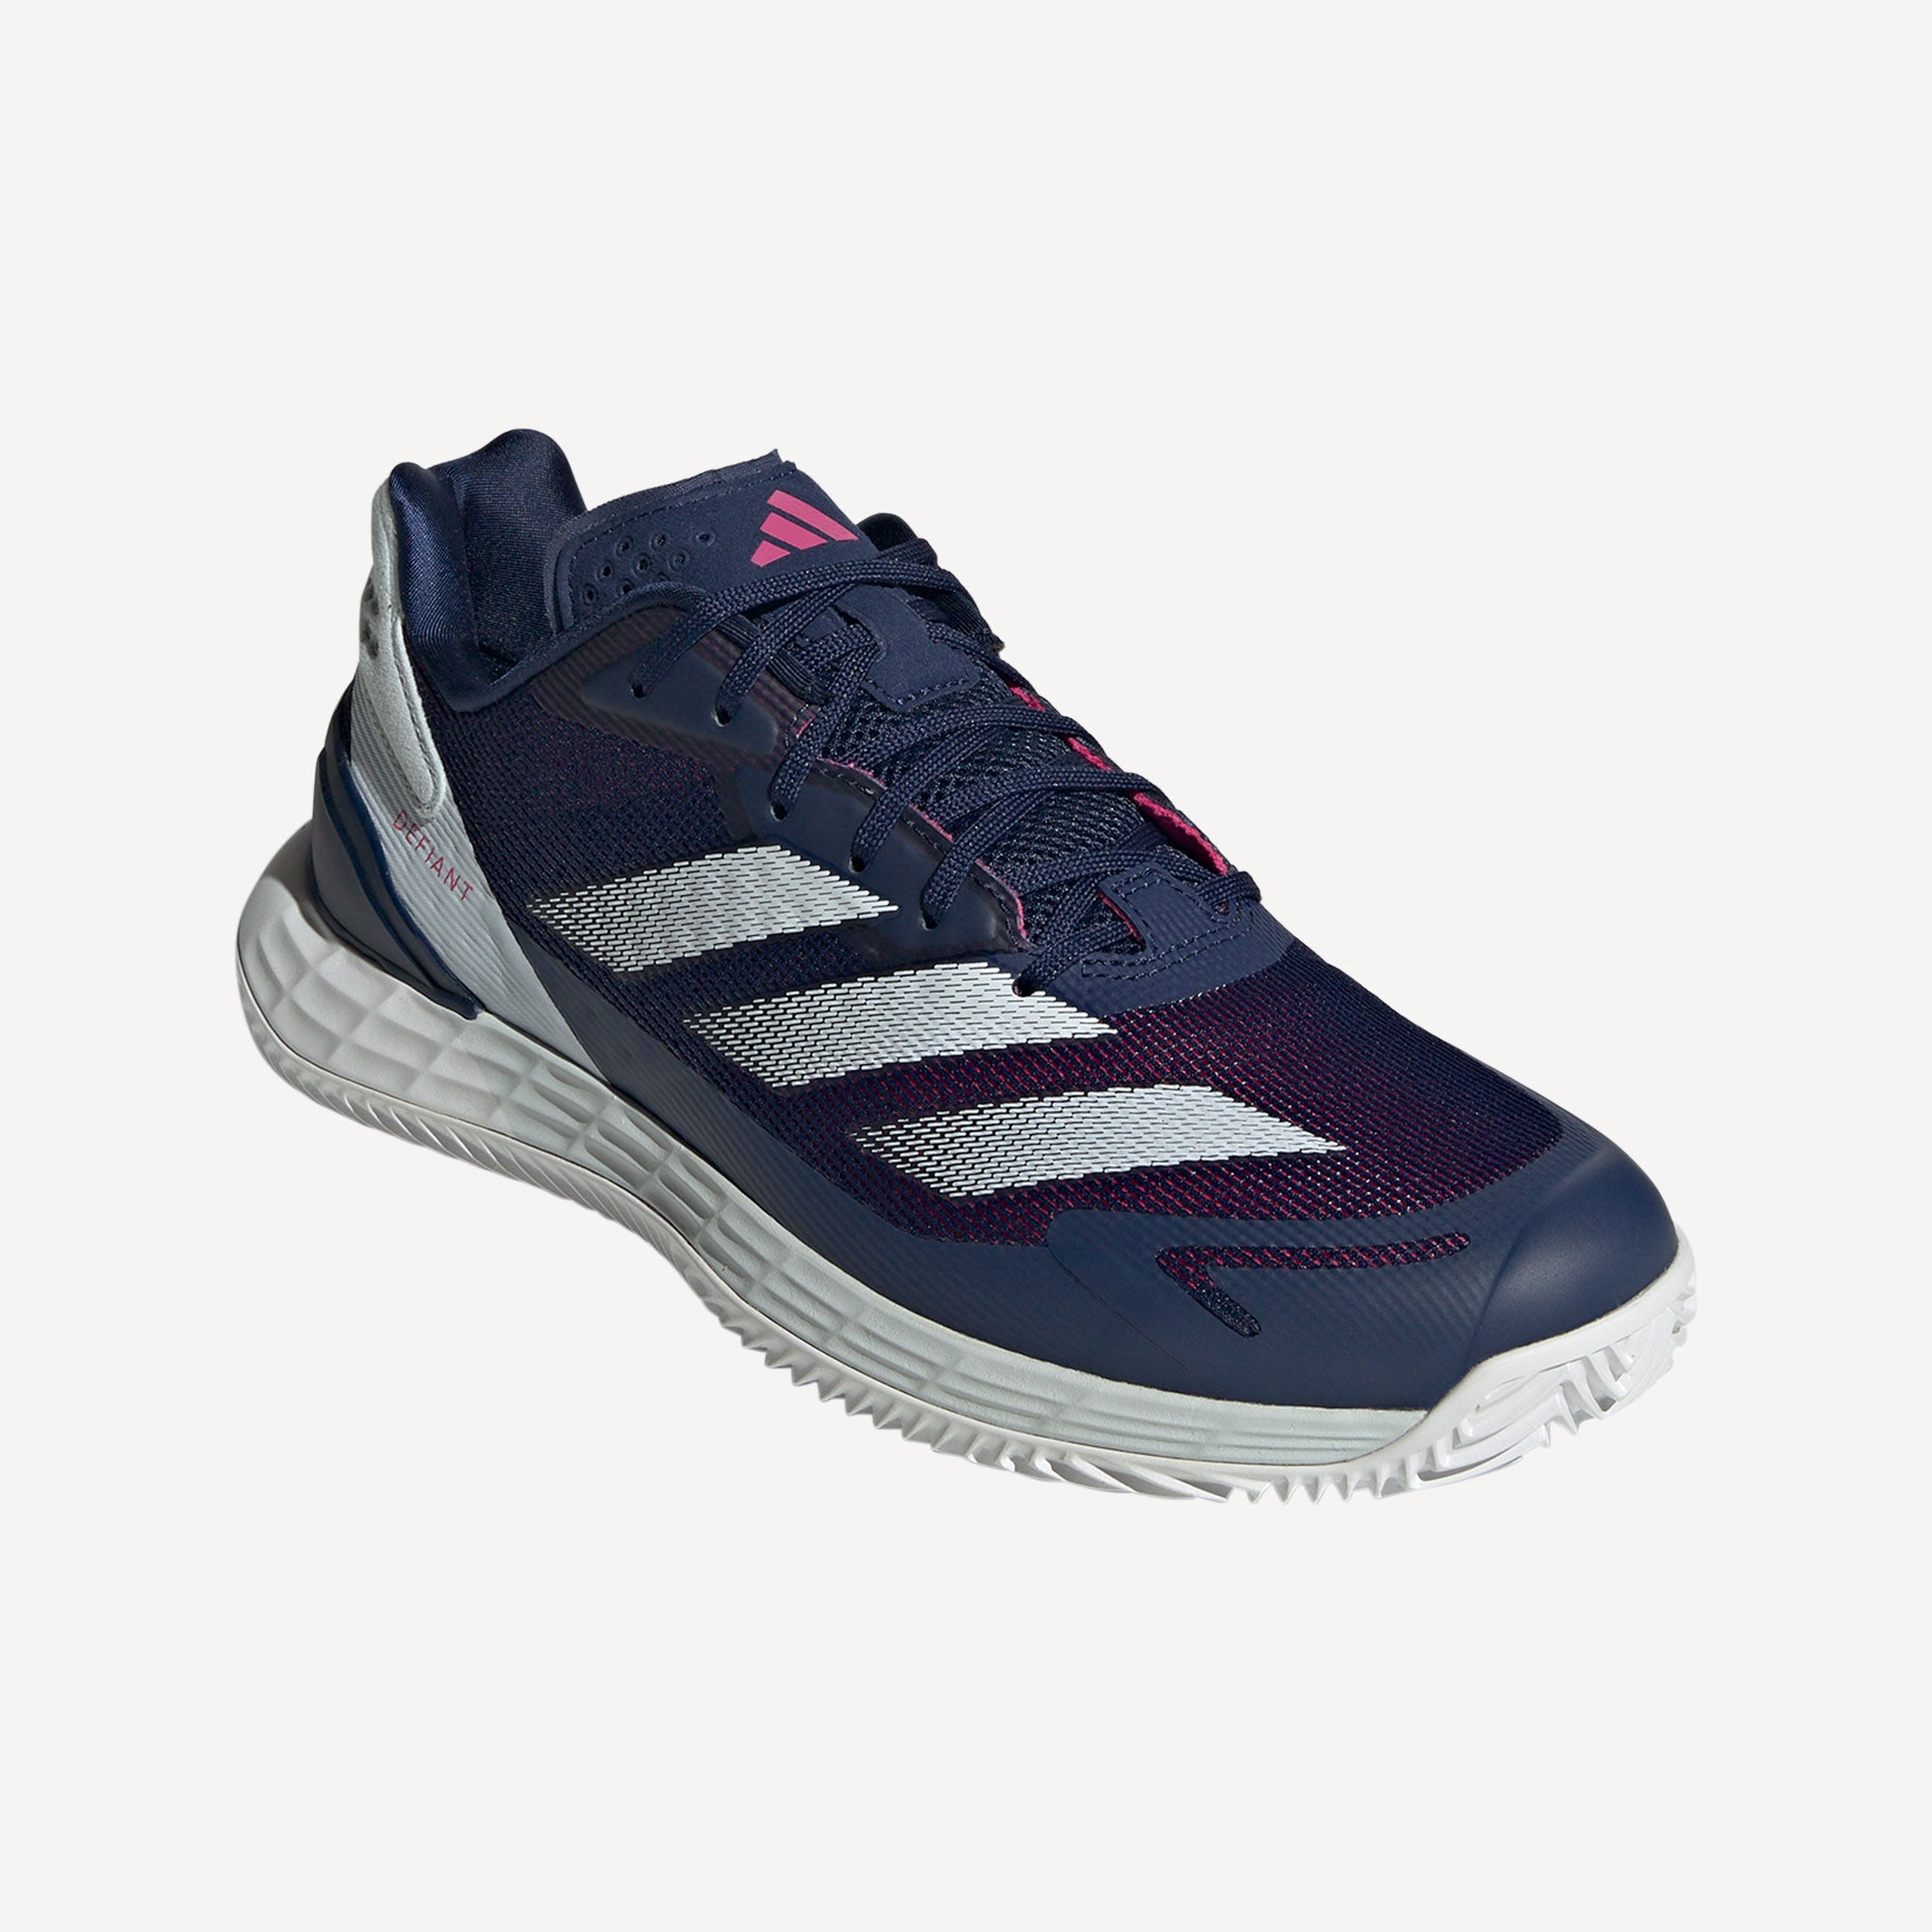 adidas Defiant Speed 2 Men's Clay Court Tennis Shoes - Blue (5)